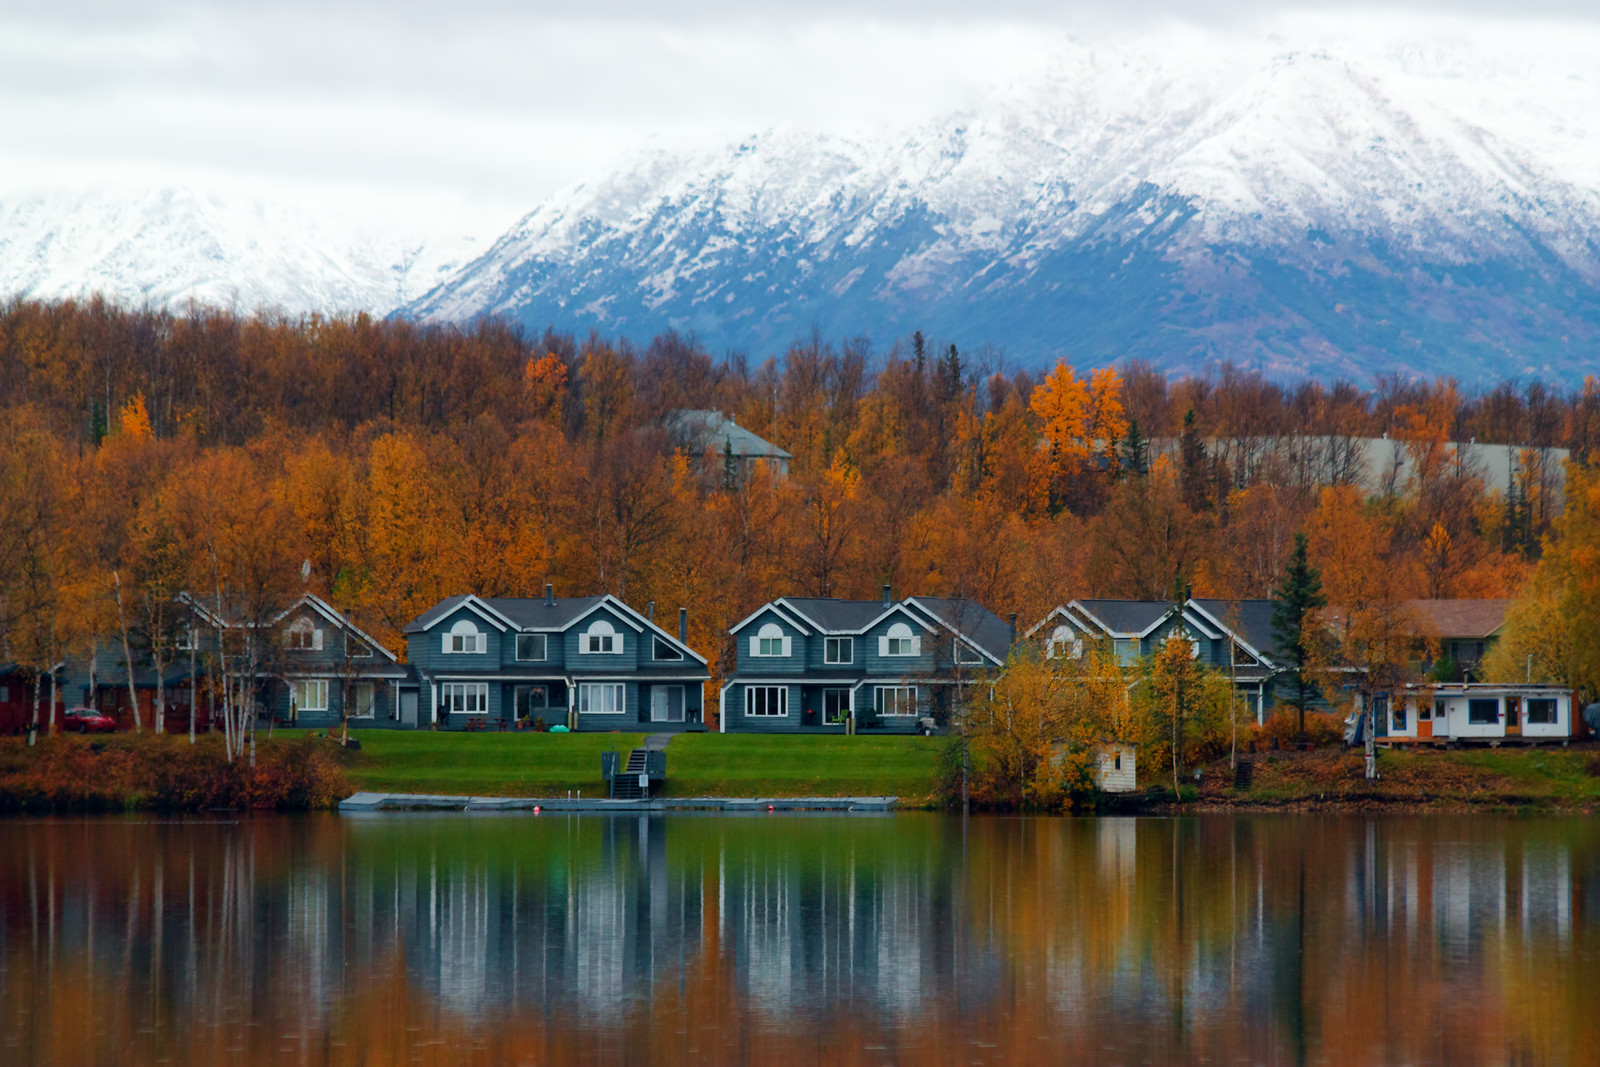 Homes On The Shore Of Lake In Wasilla With The Mountains In The Background Surrounded By Autumn Colored Trees 